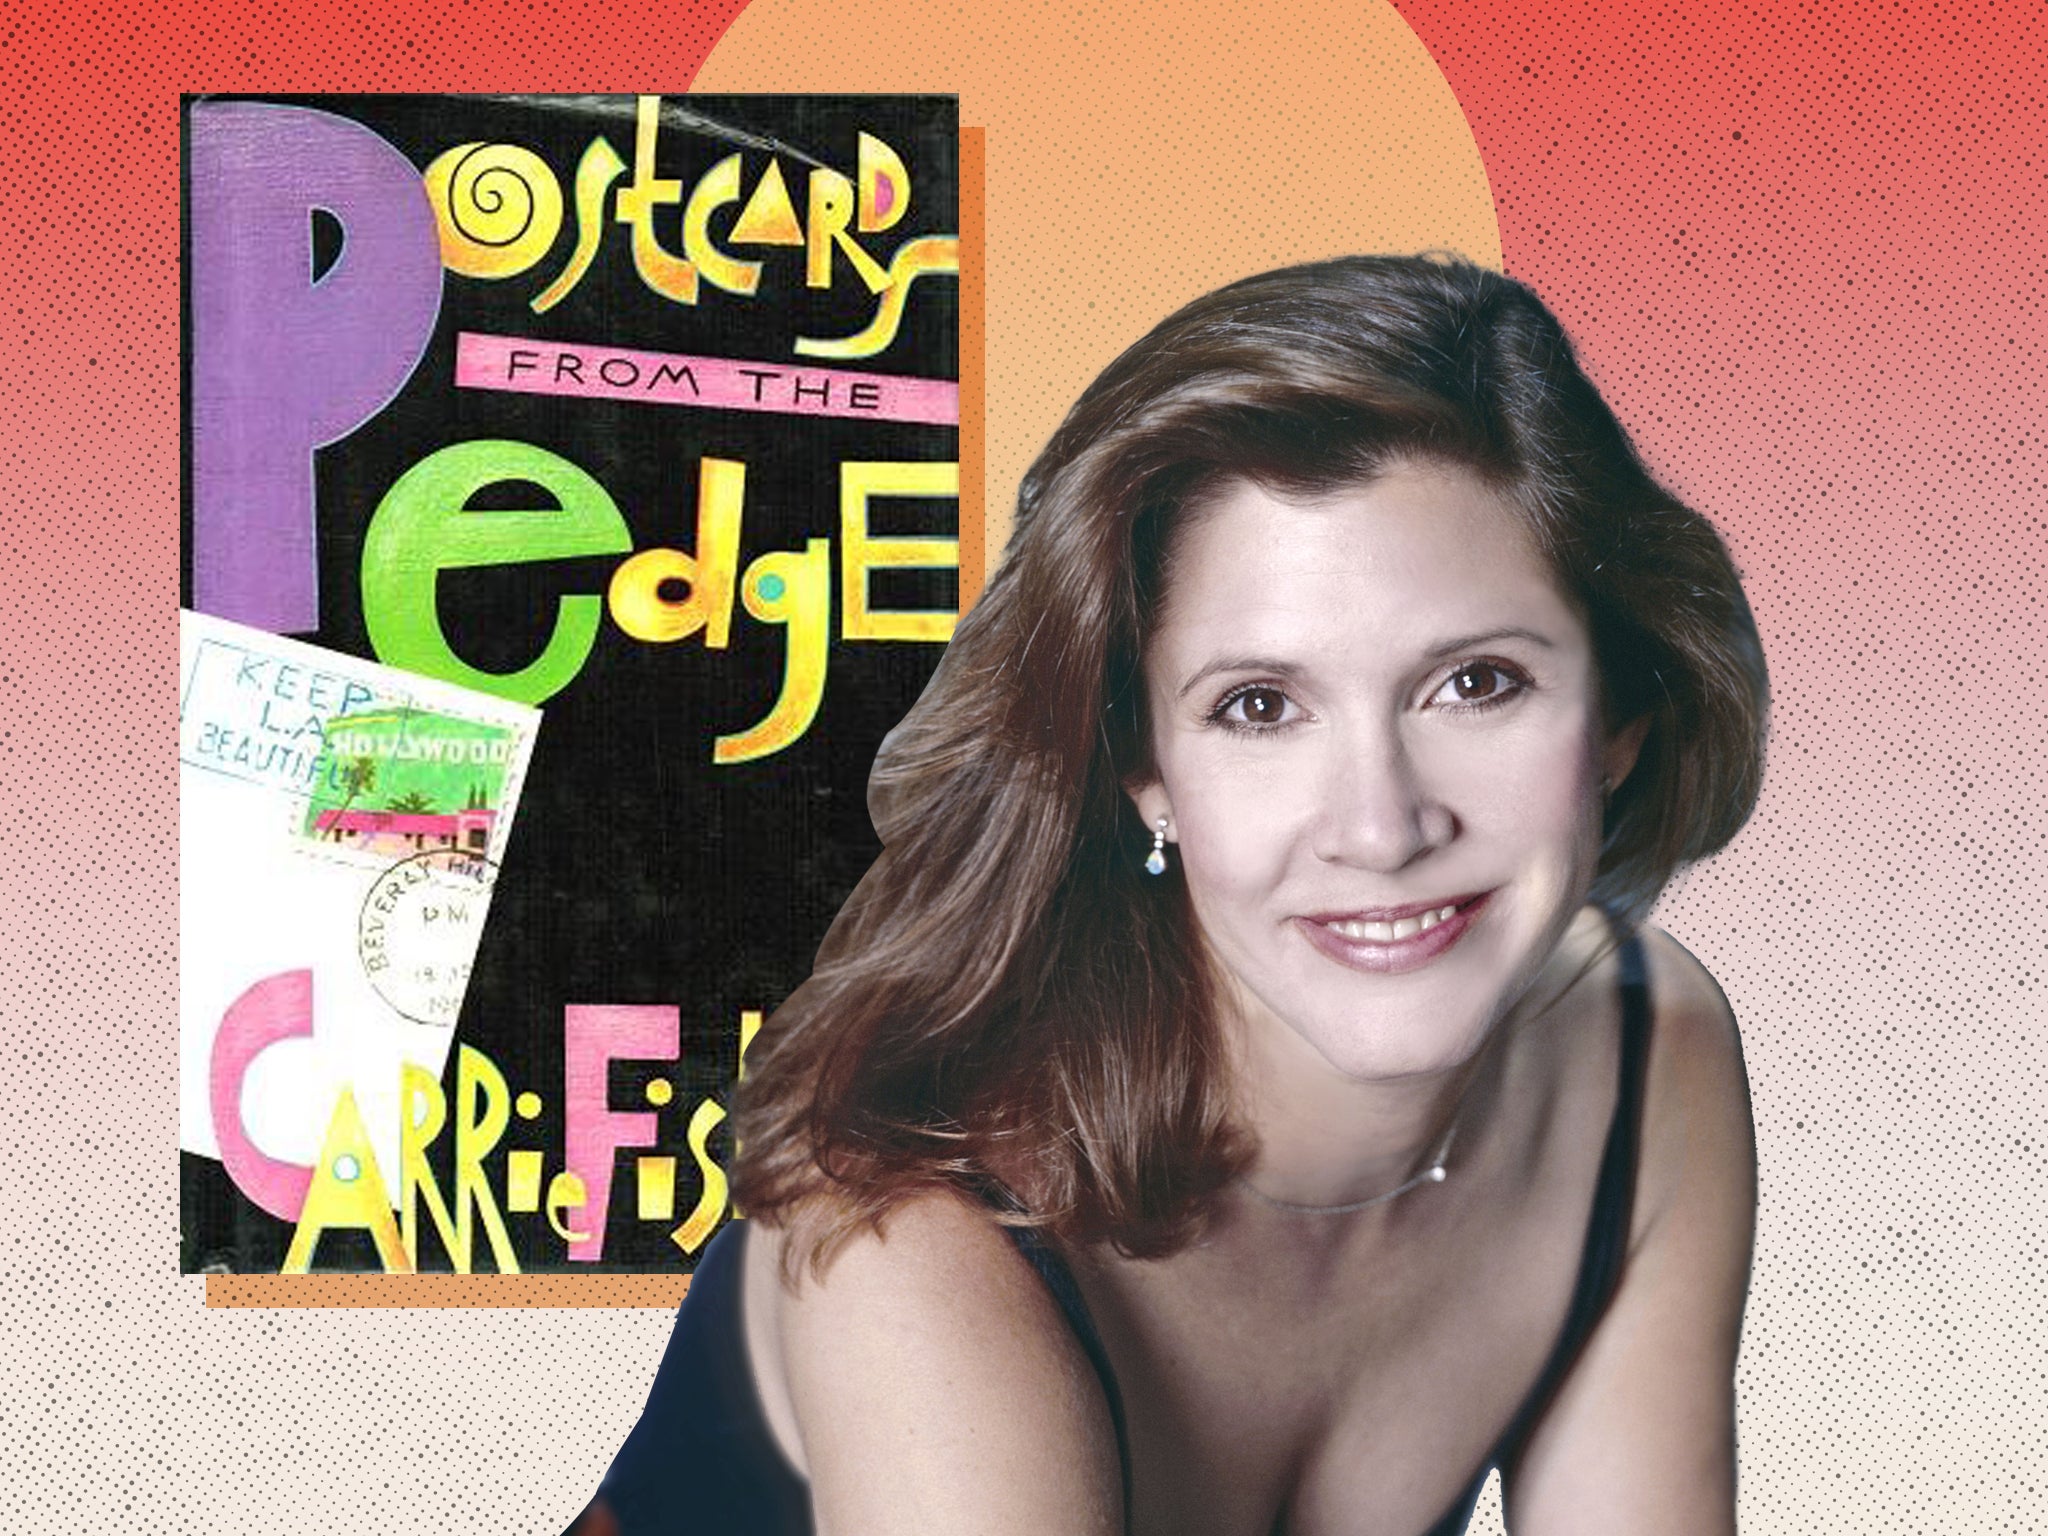 Carrie Fisher’s razor-sharp book about addiction and mental illness is celebrating its 35th anniversary this year